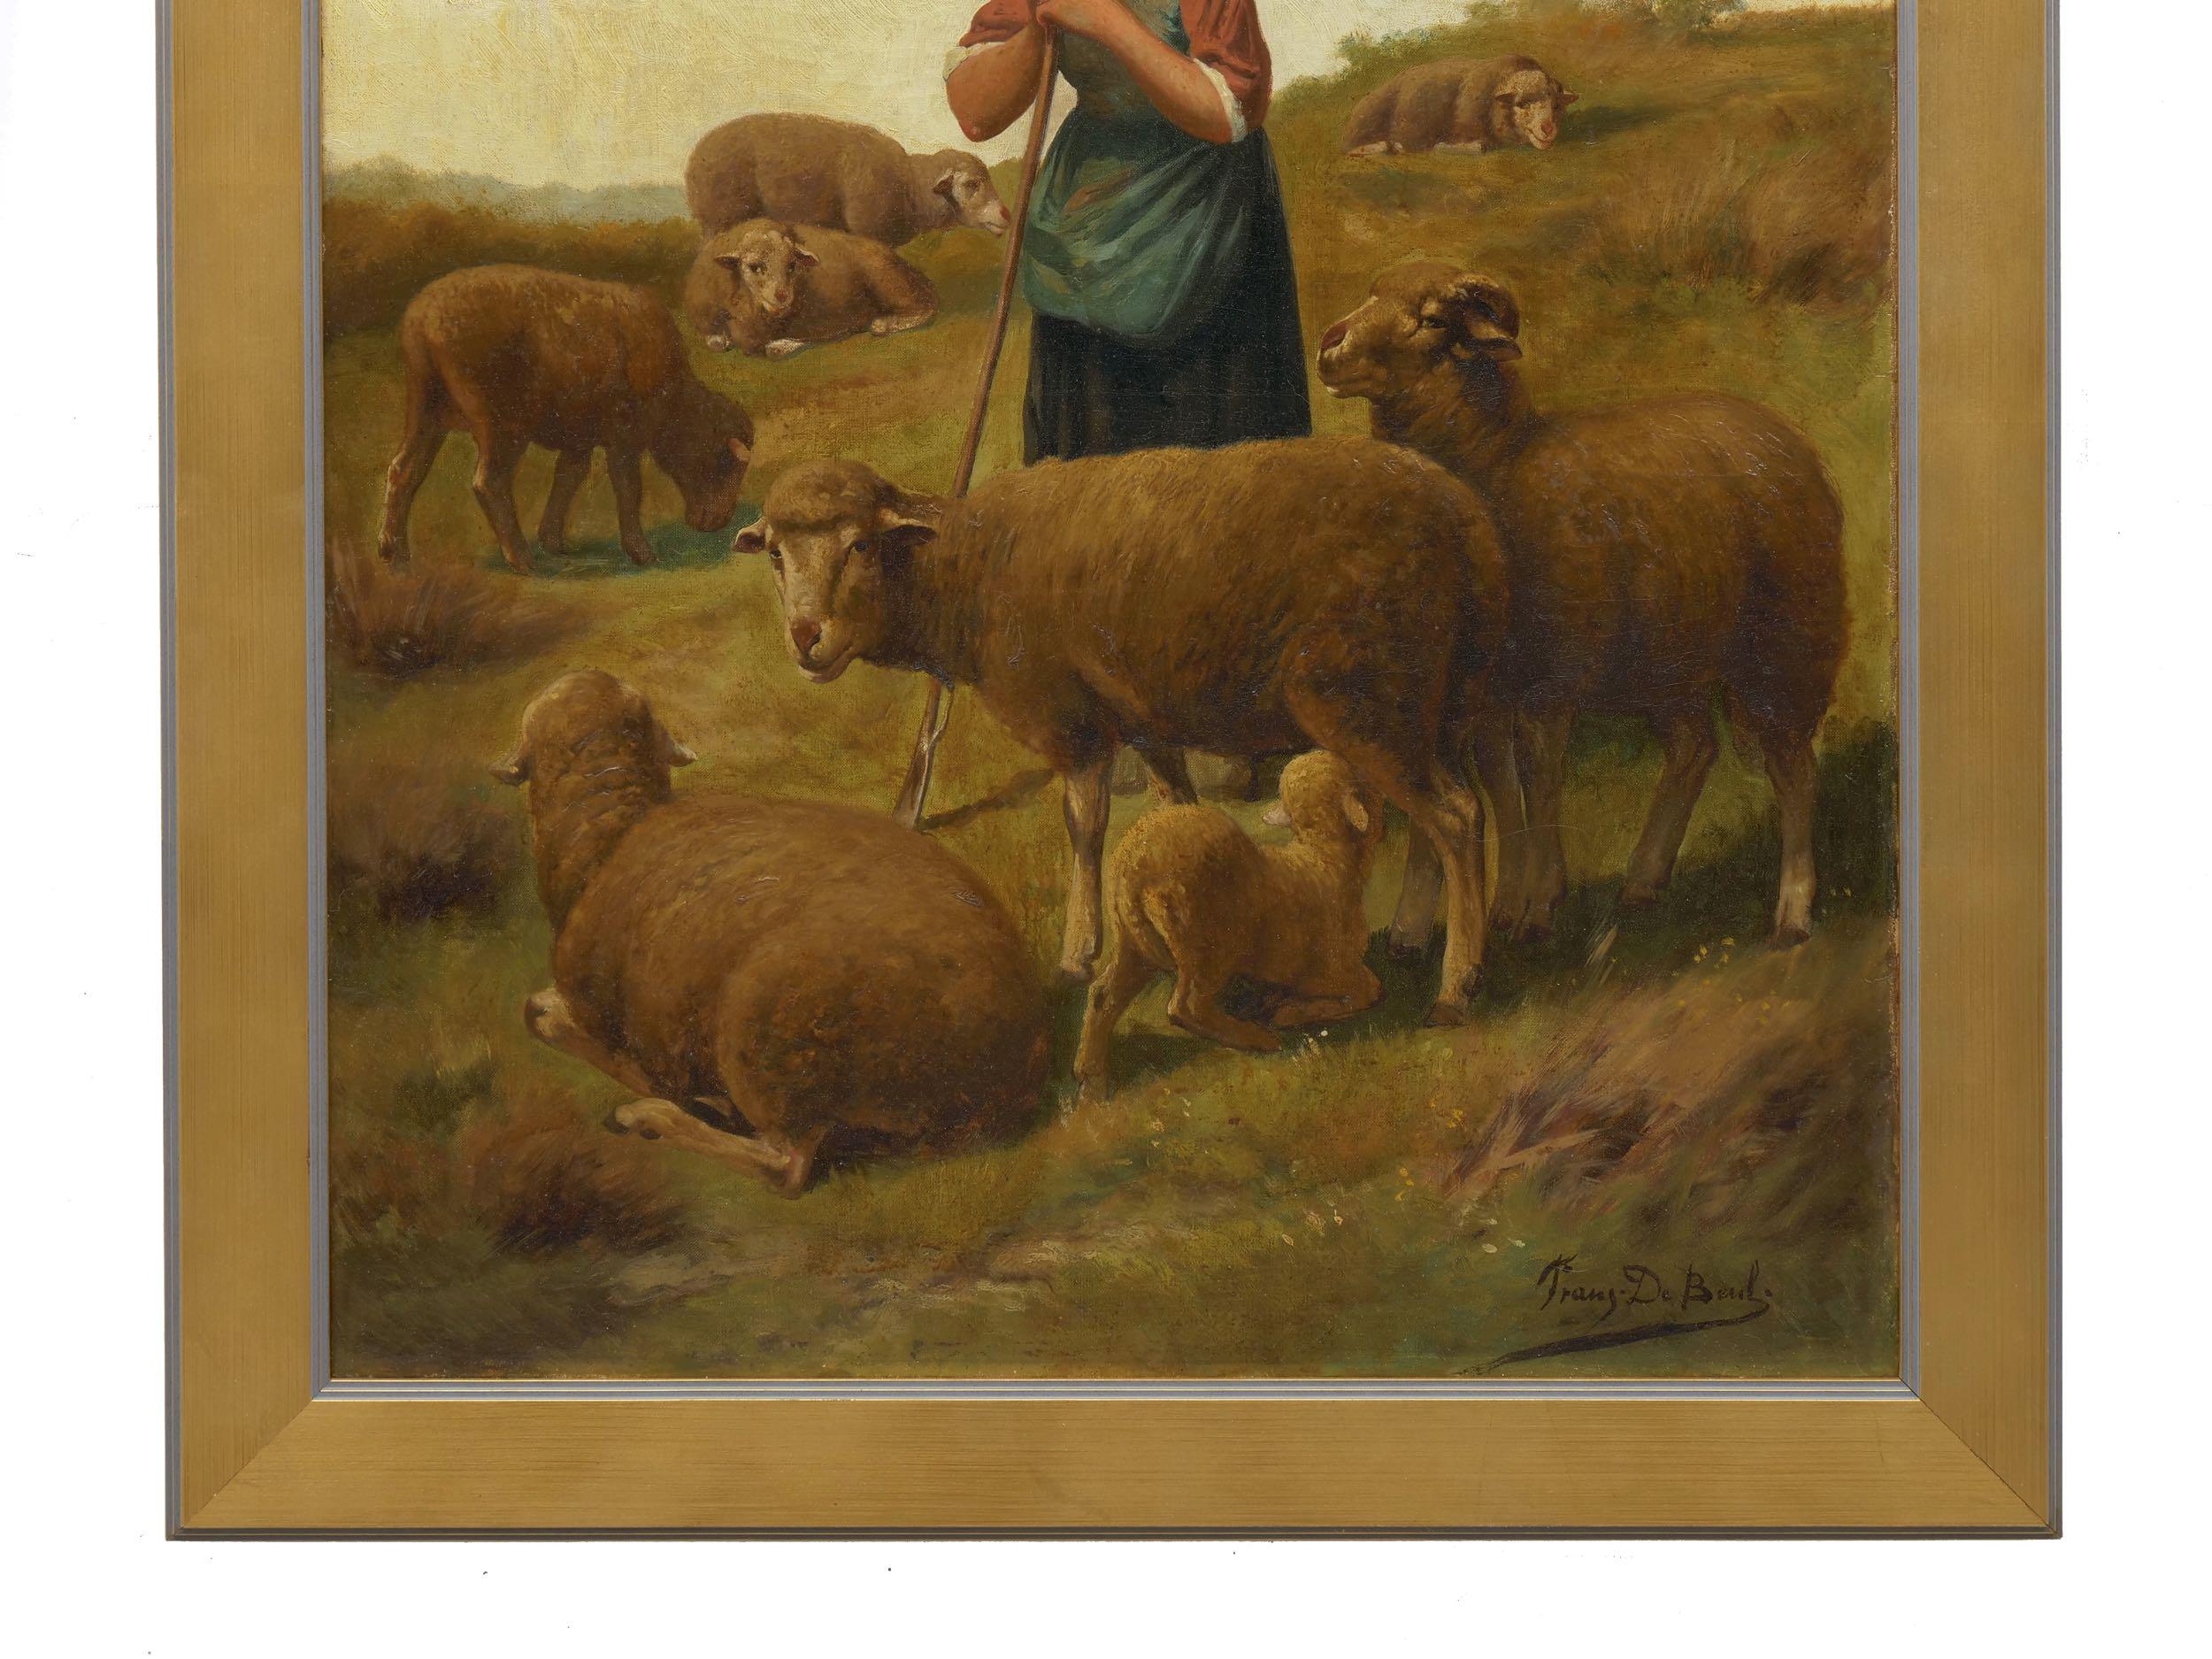 Hand-Painted “Shepherdess and Her Sheep” Antique Oil Painting Signed Franz de Beul, 19th C